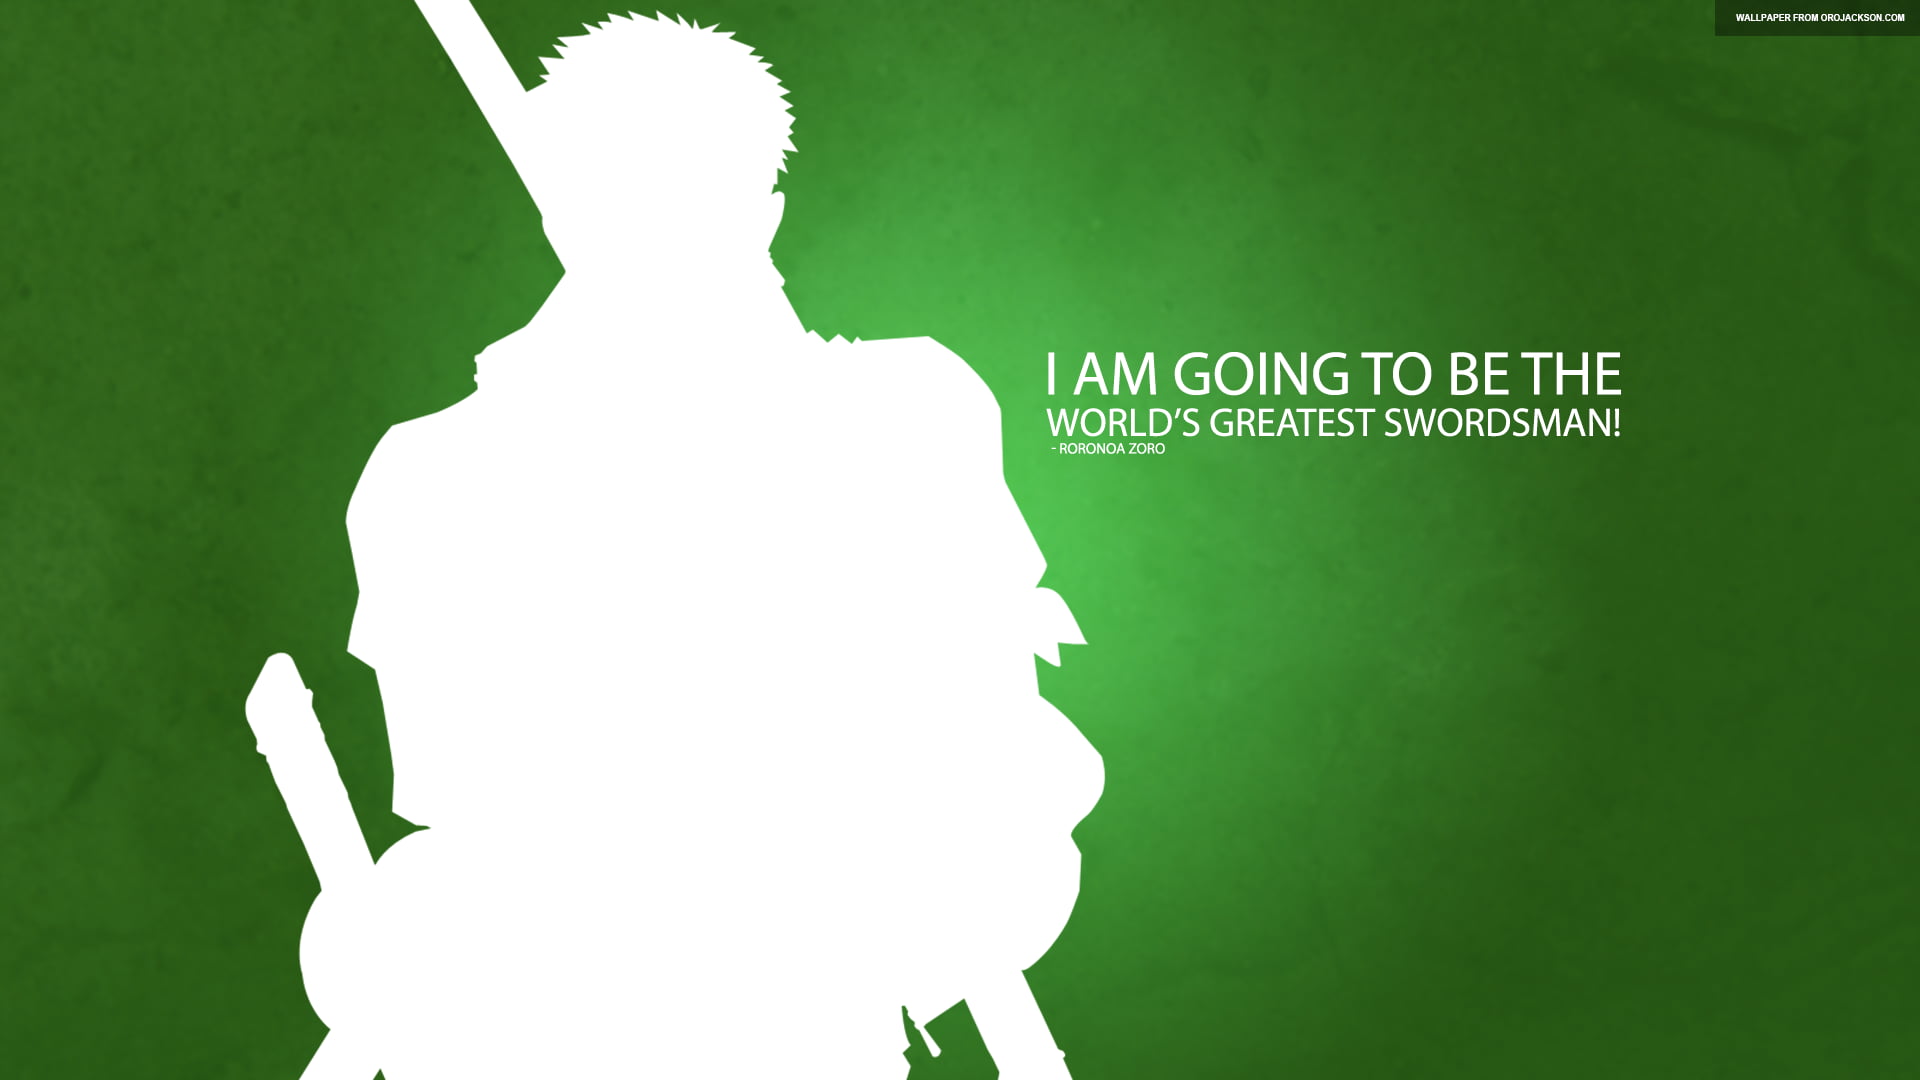 I am going to be the world's best swordsman! quote poster, One Piece, Roronoa Zoro, anime